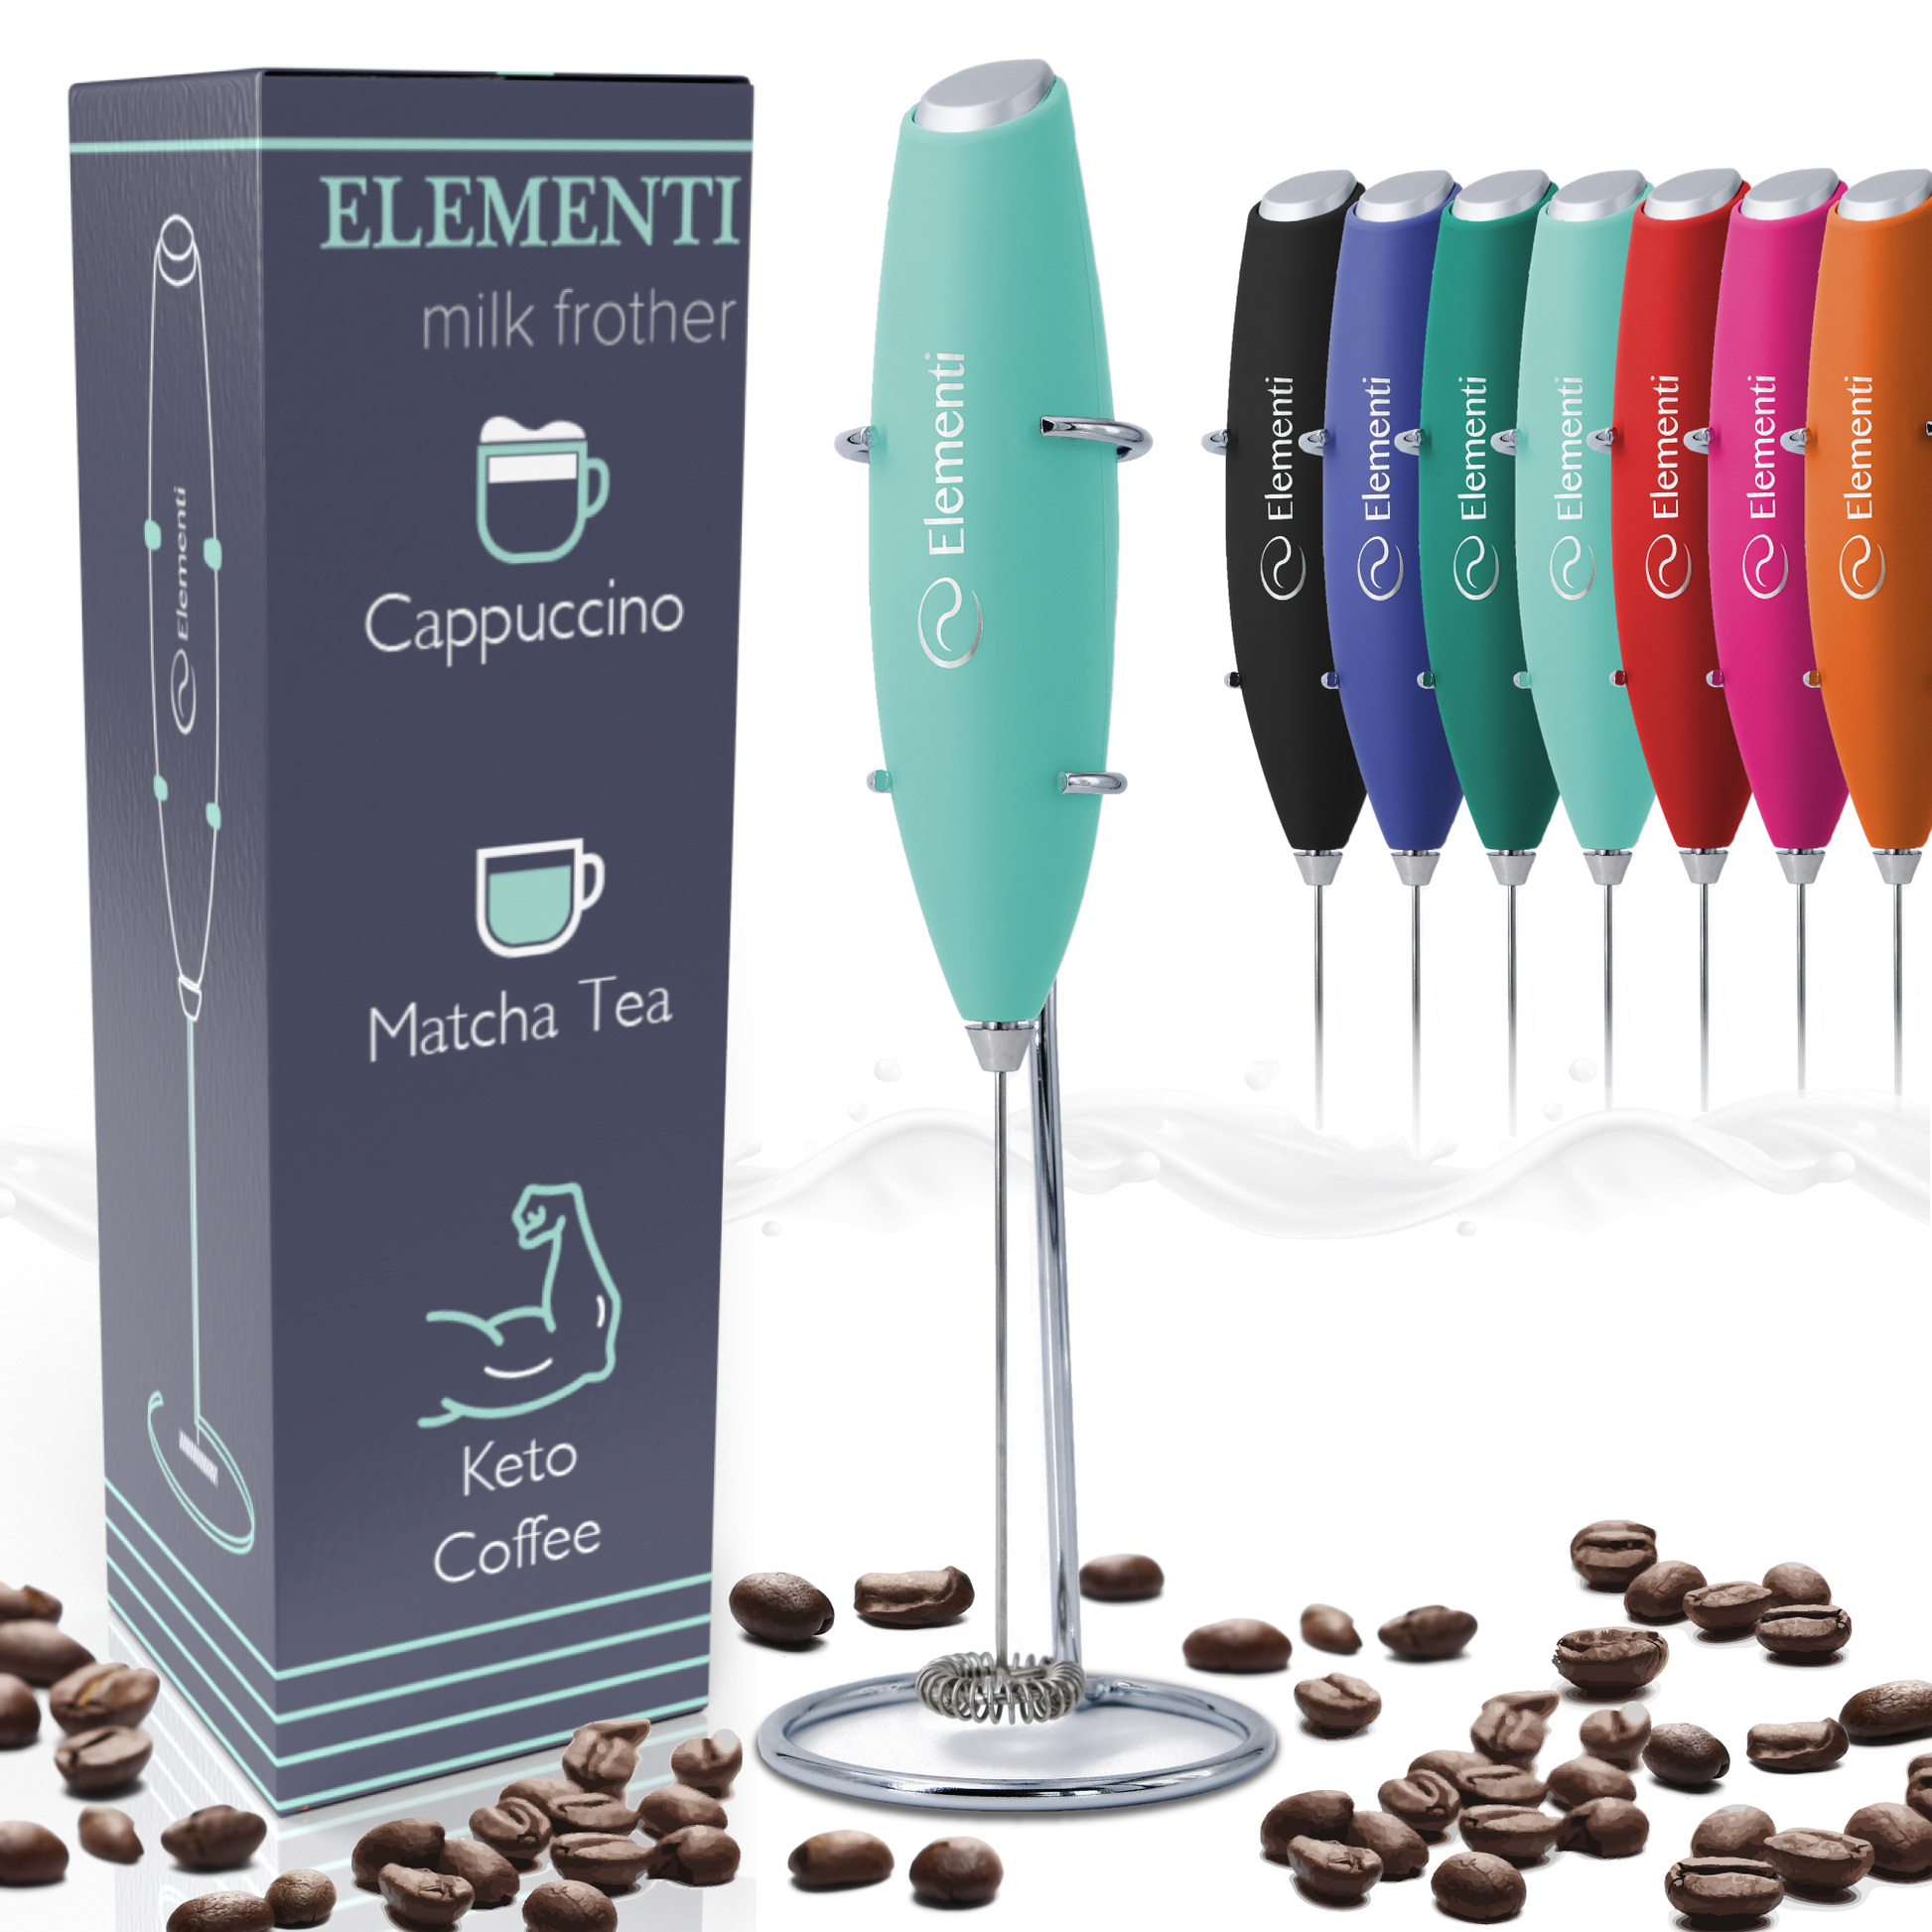 Good Citizen Coffee Co. Electric Frother-Mint